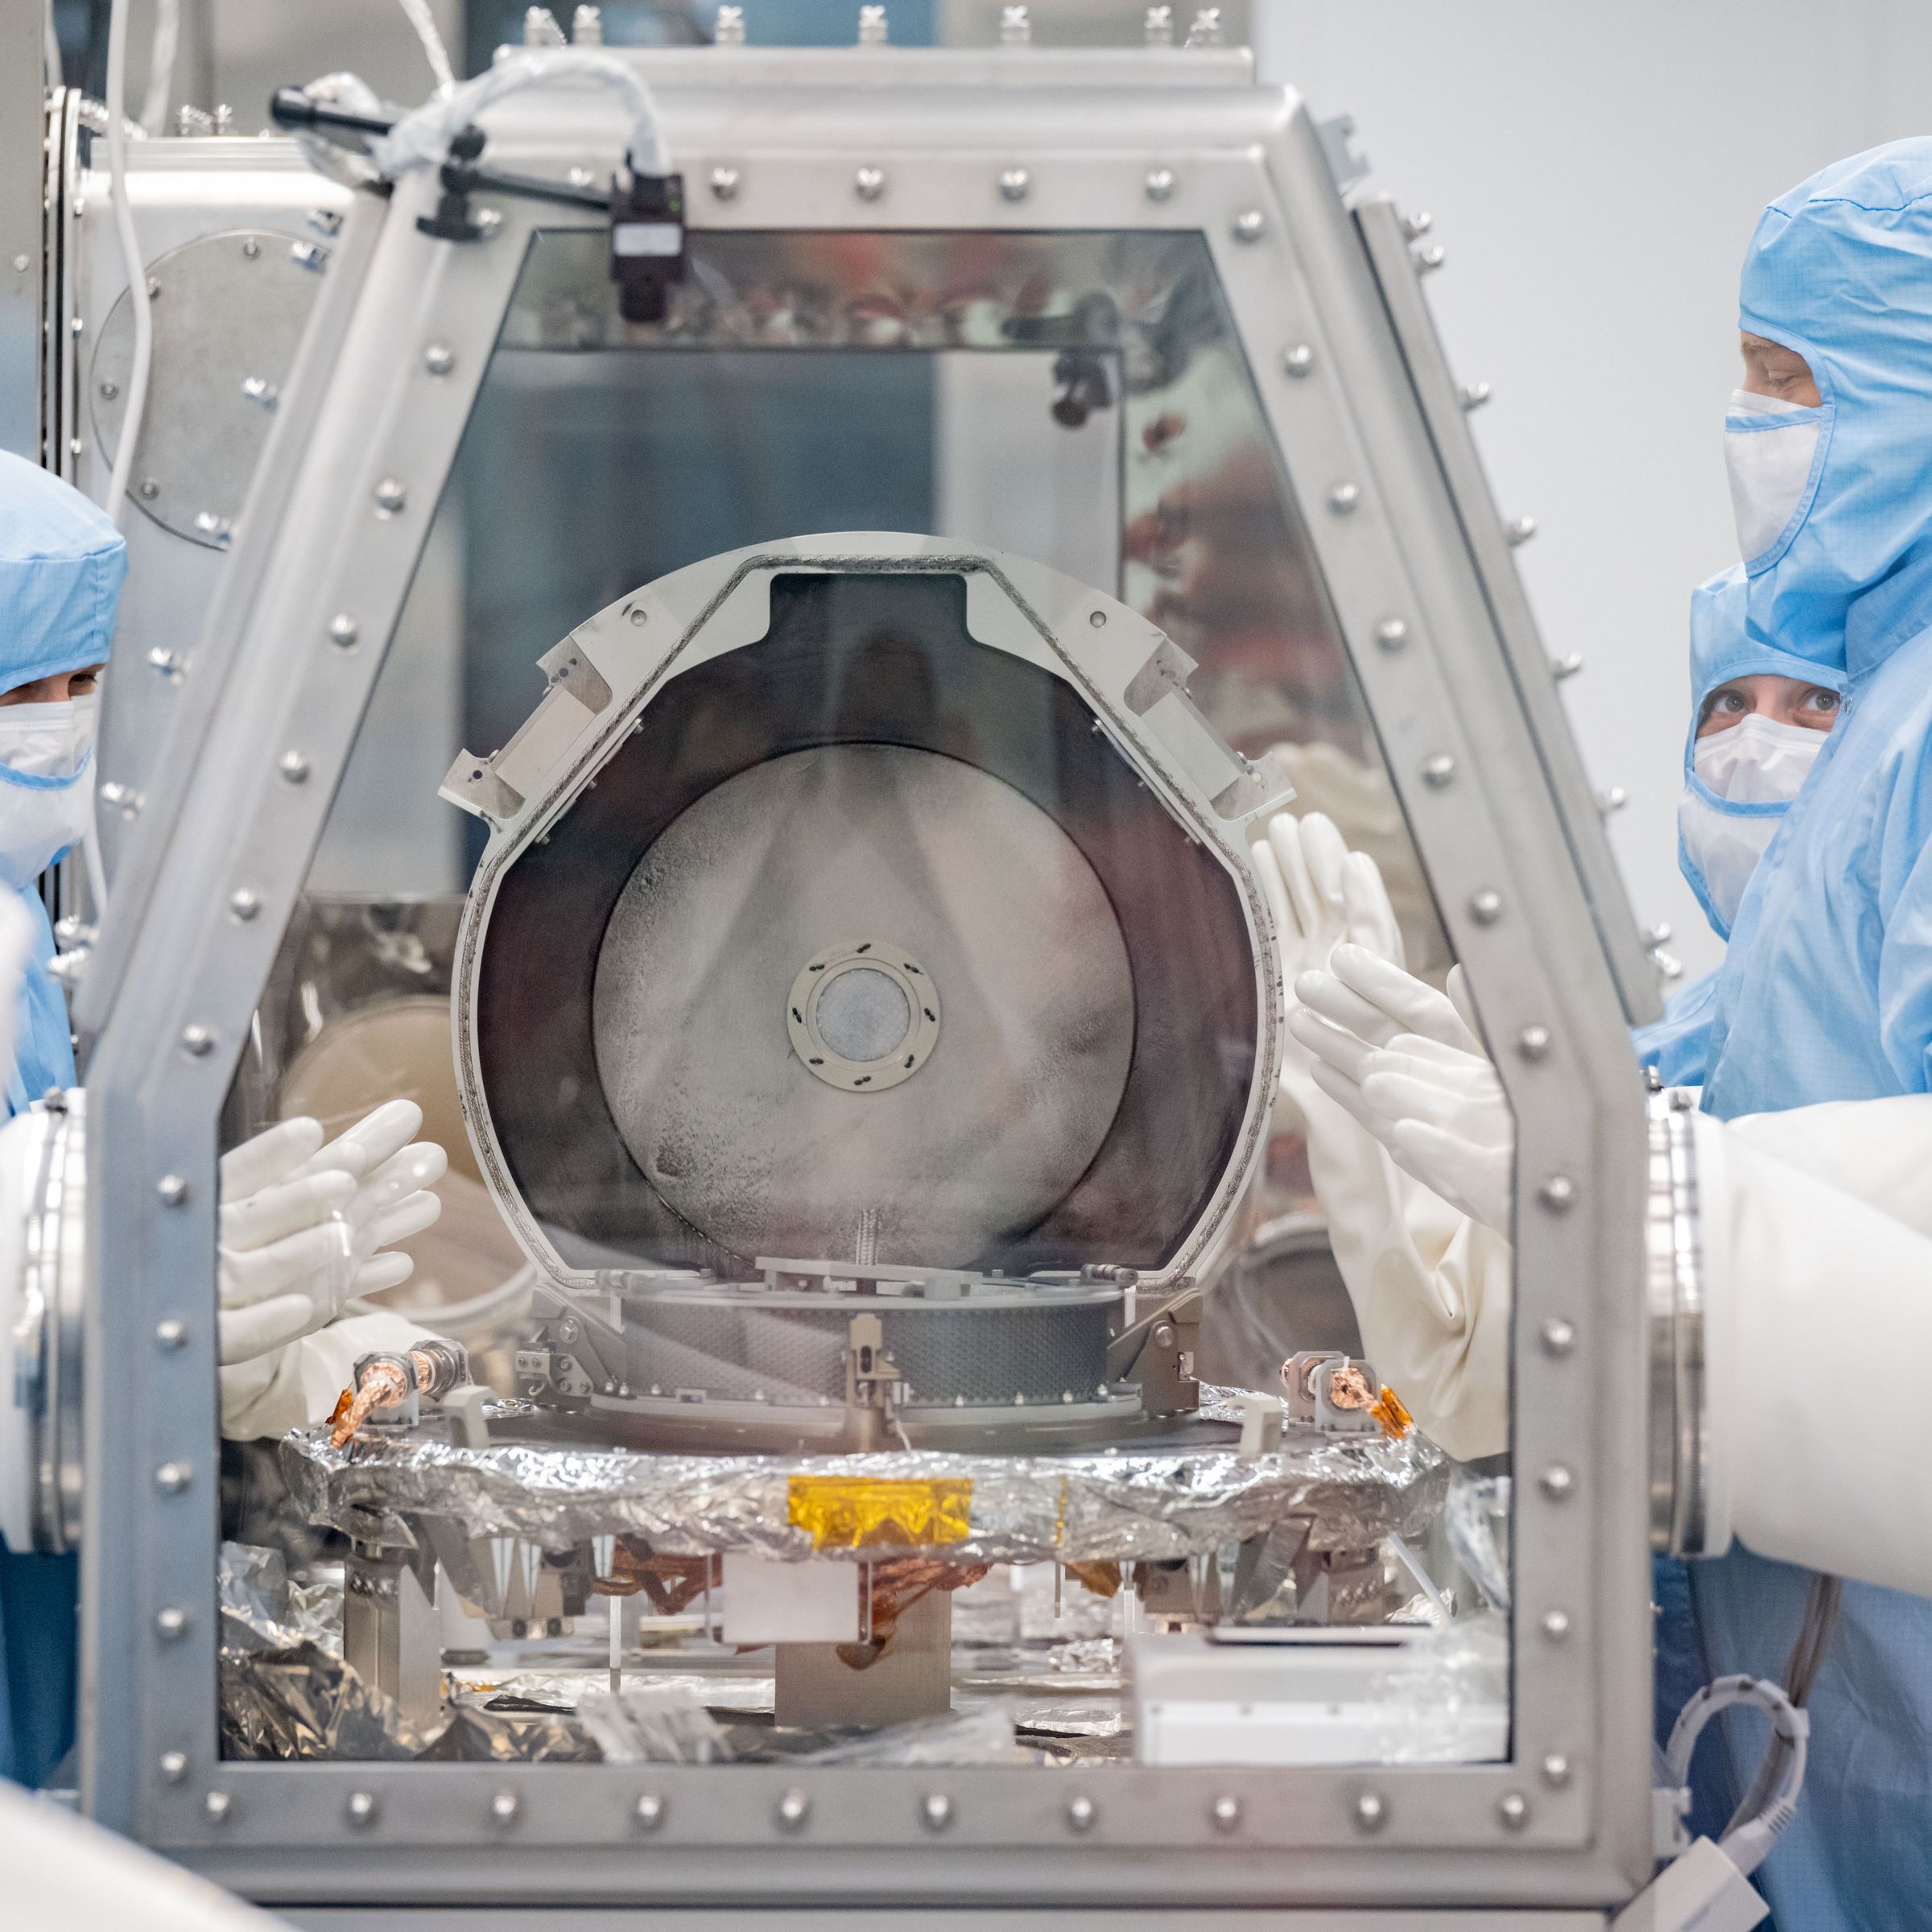 Several scientists in a clean room wearing protective gear look into the glass-shielded container holding the OSIRIS-REx sample return canister.